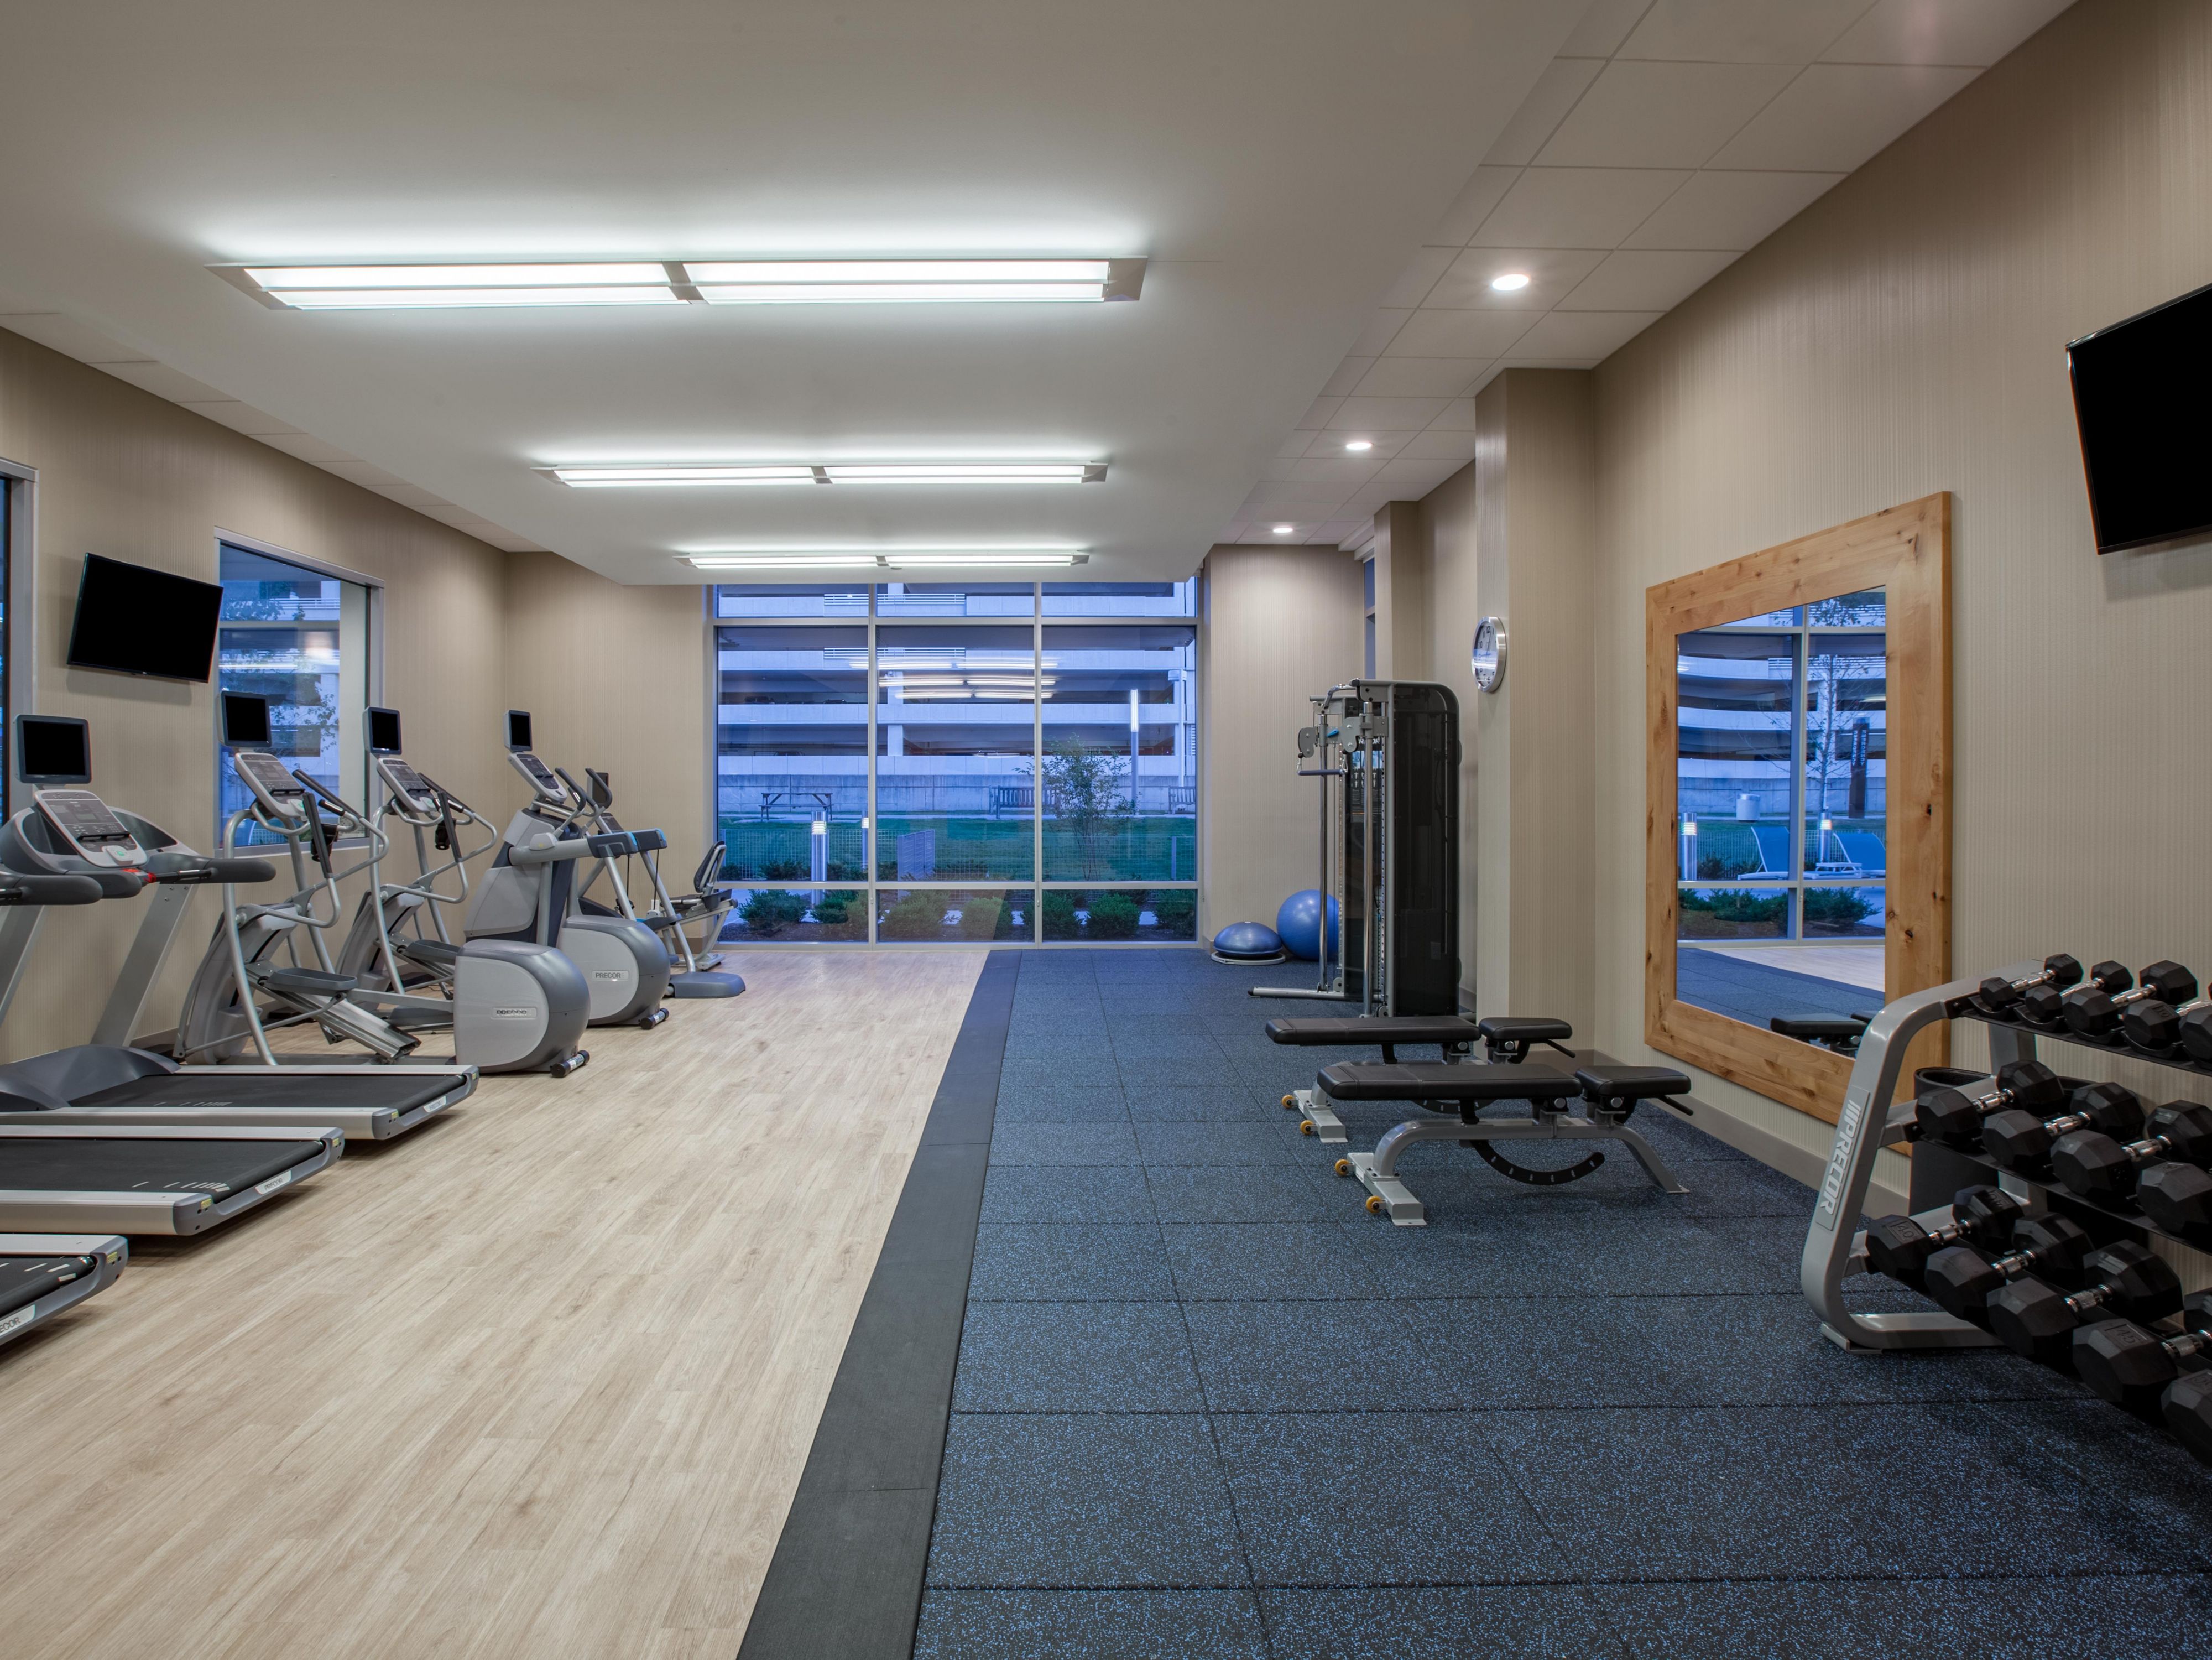 Maintaining your routine while traveling is important, especially when you’re short on time and on the go. We get it. The right workout—right when you want it—helps you stay focused, energized and on top of your game. So, recharge and feel ready for anything with our fully equipped fitness center and heated indoor swimming pool.